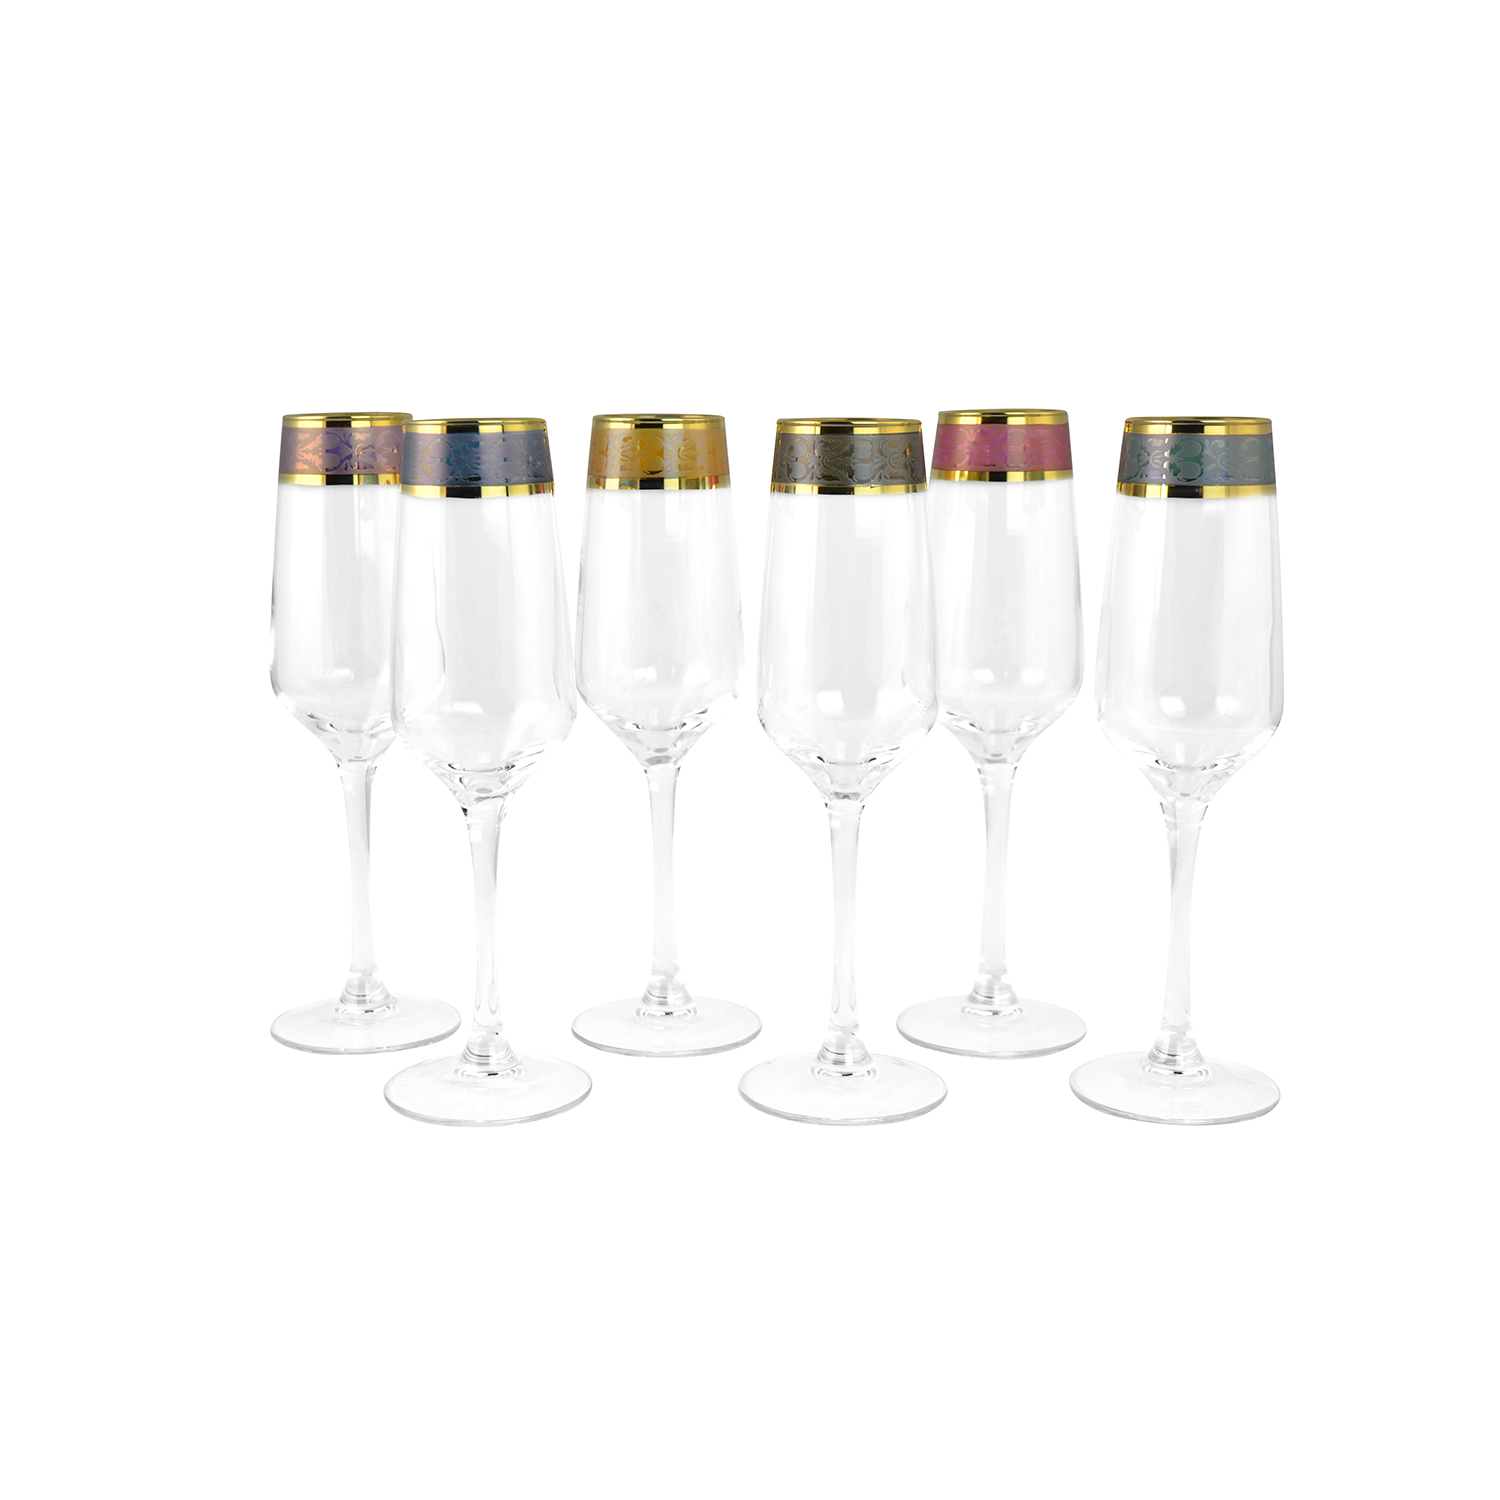 6PC SET OF 8.5" FLUTE GLASS W/ GOLD & 6 COLORS